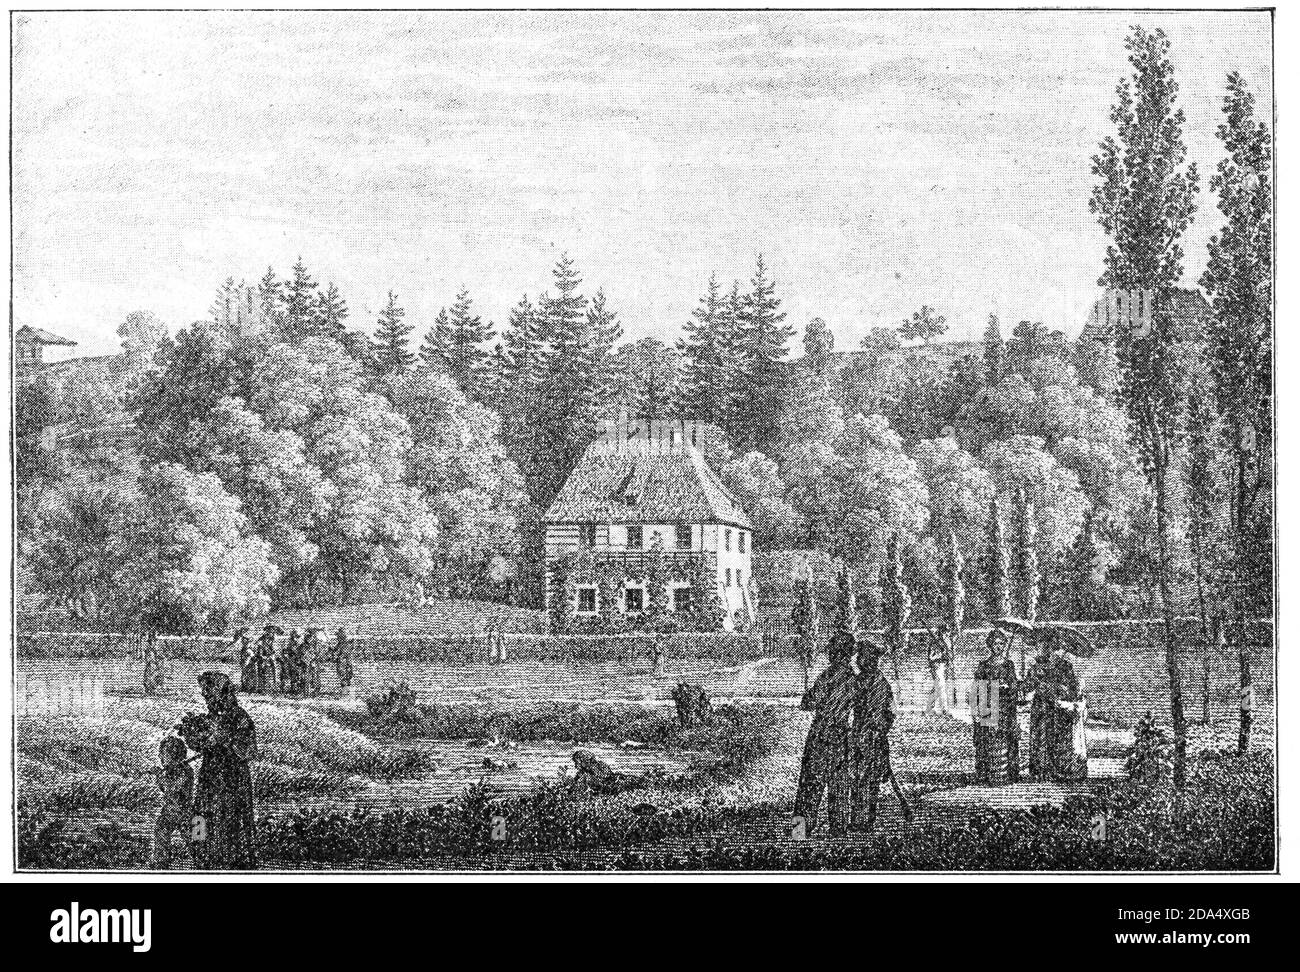 Goethes Gartenhaus in Weimar, Germany, 1828. Illustration of the 19th century. White background. Stock Photo